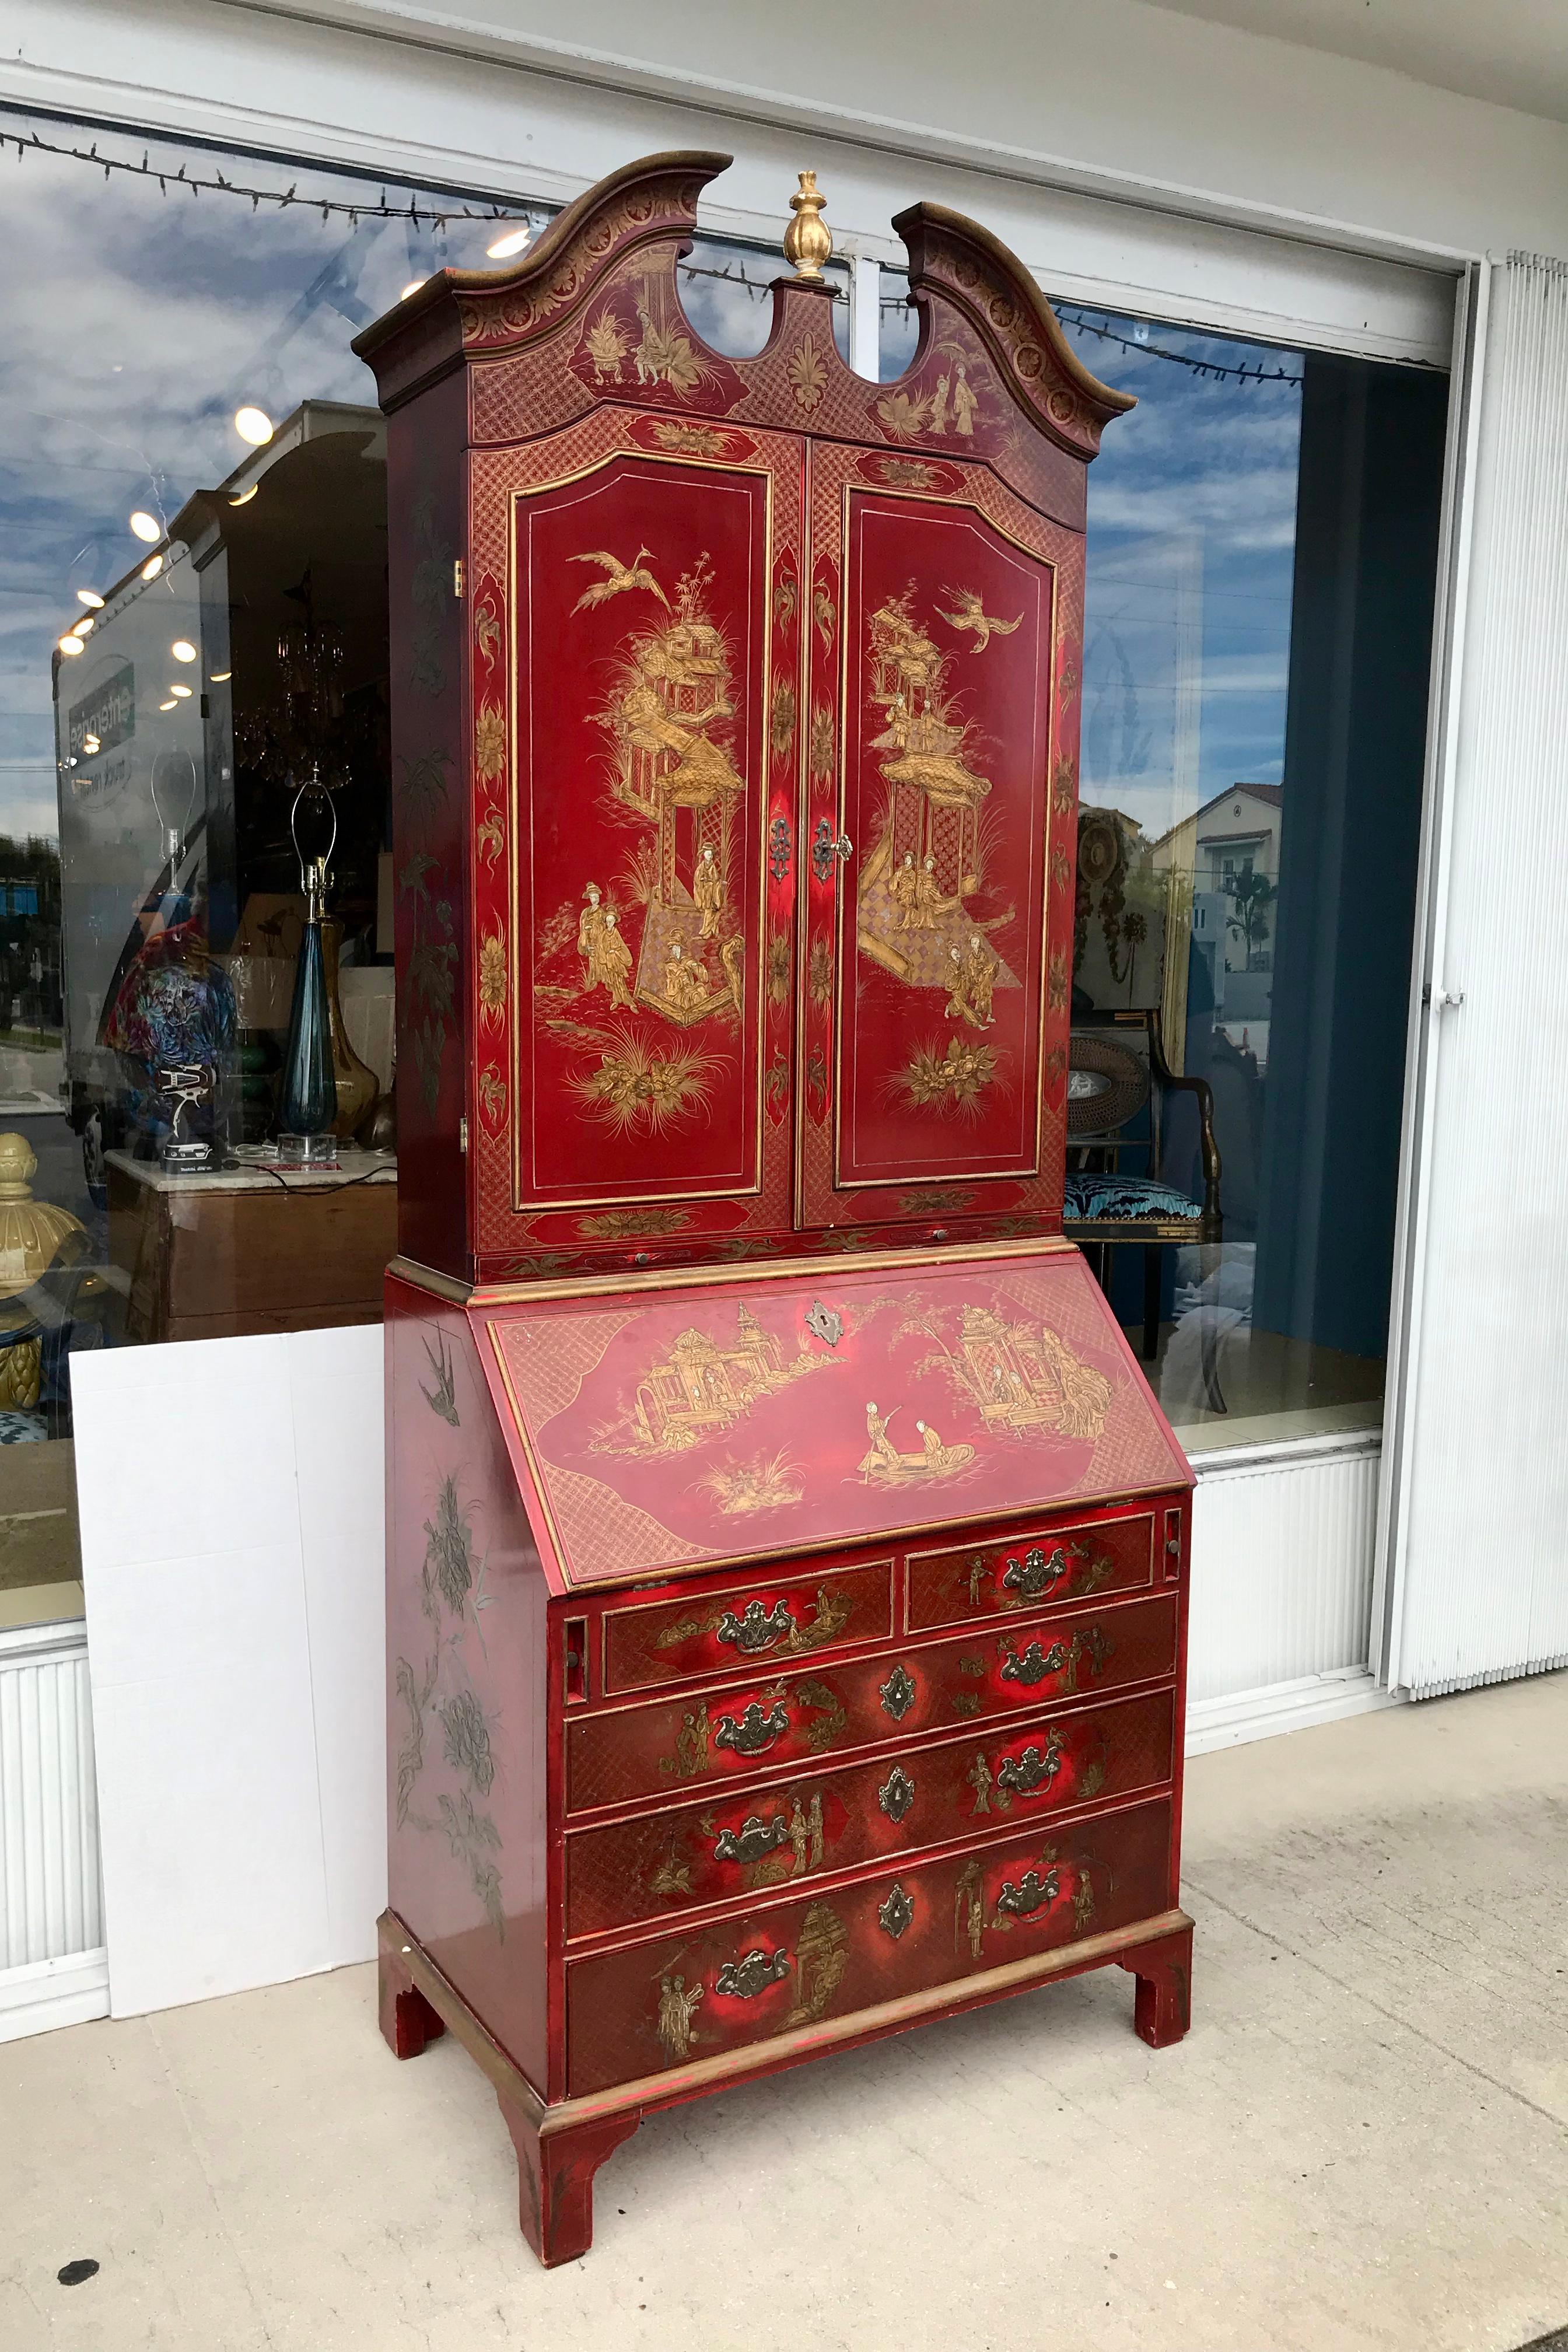 Superior quality, an important and highly stylized Edwardian period desk.
Magnificent rich color, elaborate pen work and a multitude of chinoiserie details
distinguish this desk. A plethora of figures dominate the design.
The desk is fitted with